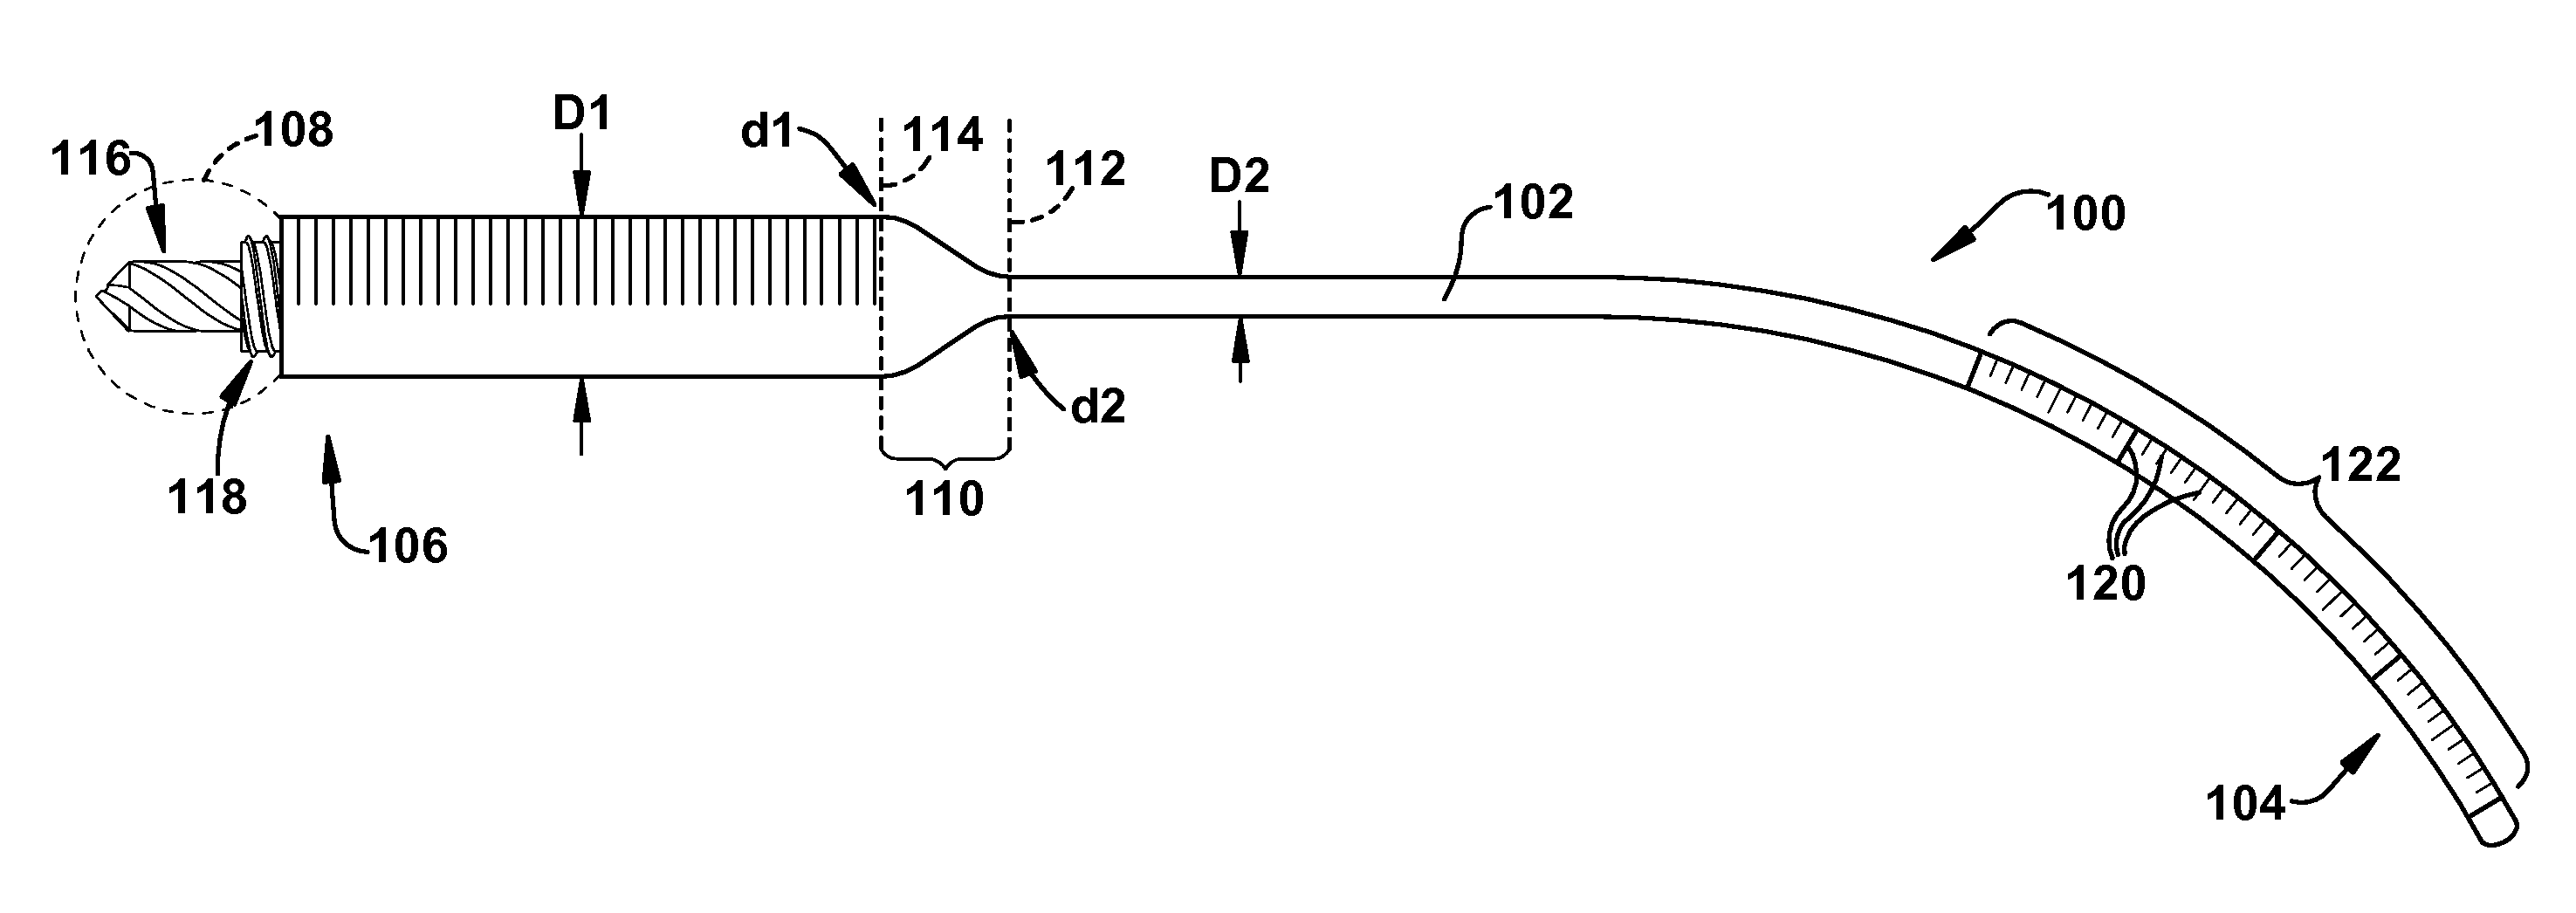 Method and apparatus for providing a relative location indication during a surgical procedure